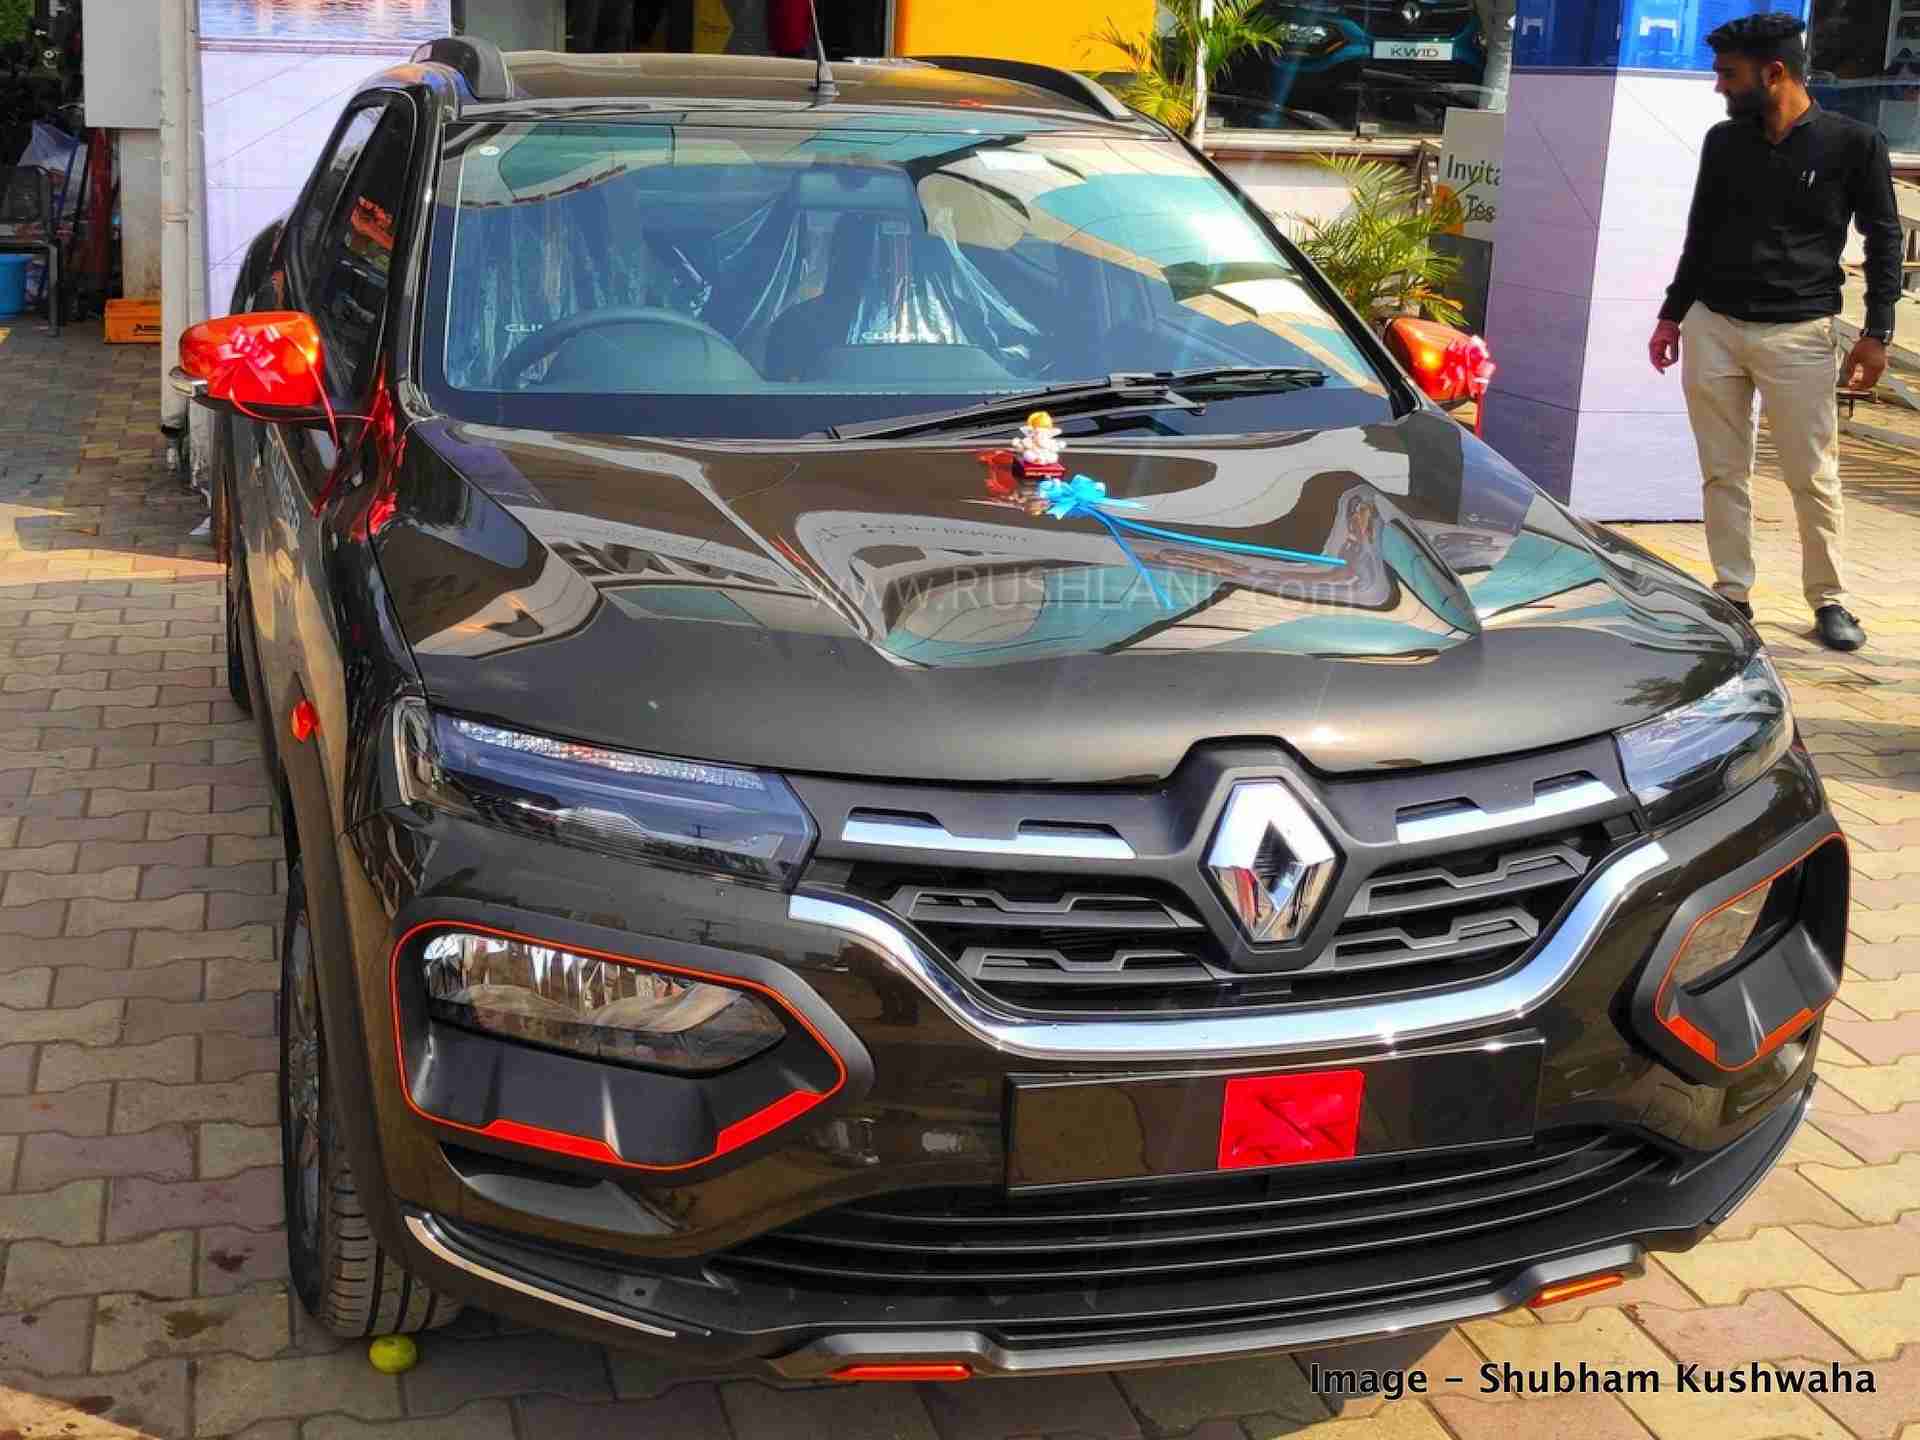 Renault Kwid Car Images And Price